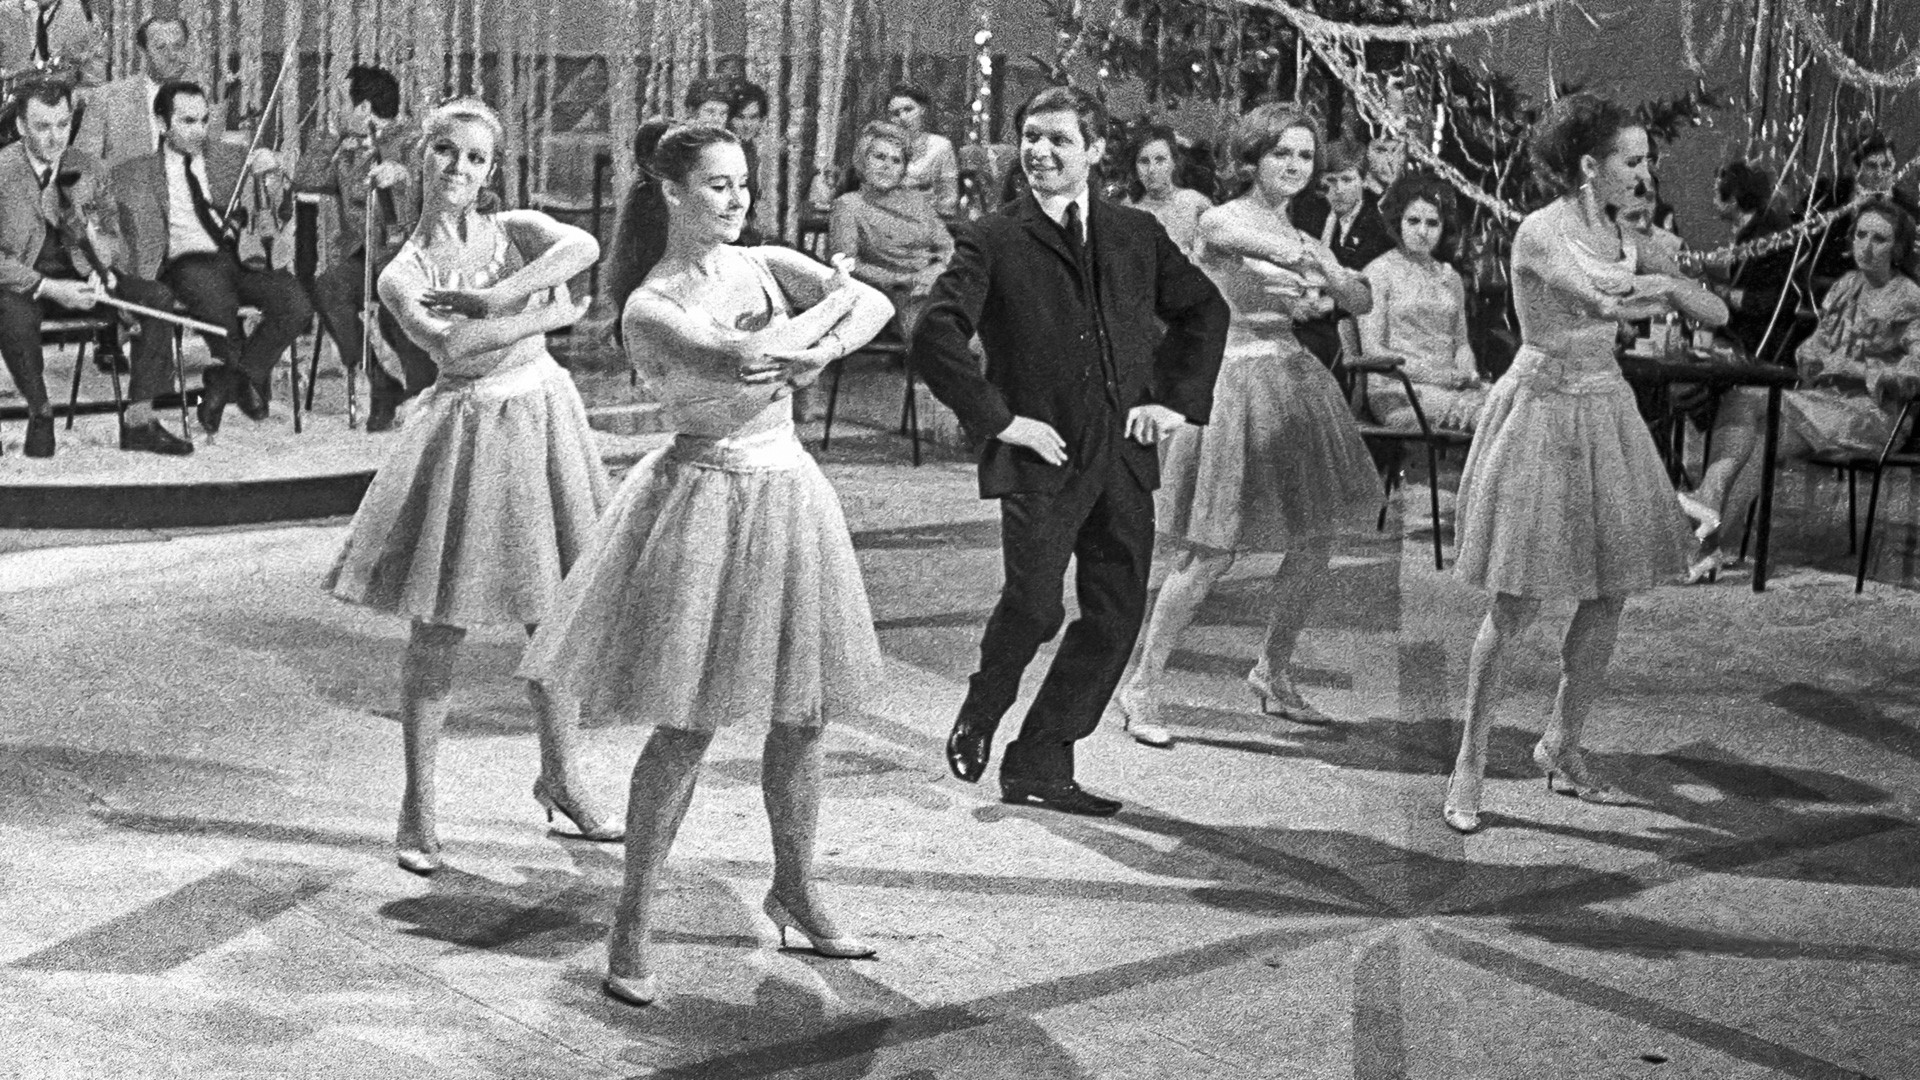 Moscow, USSR. Singer Eduard Khil and dance band “Alye parusa” perform at the Central Television in the TV show “Little Blue Light."